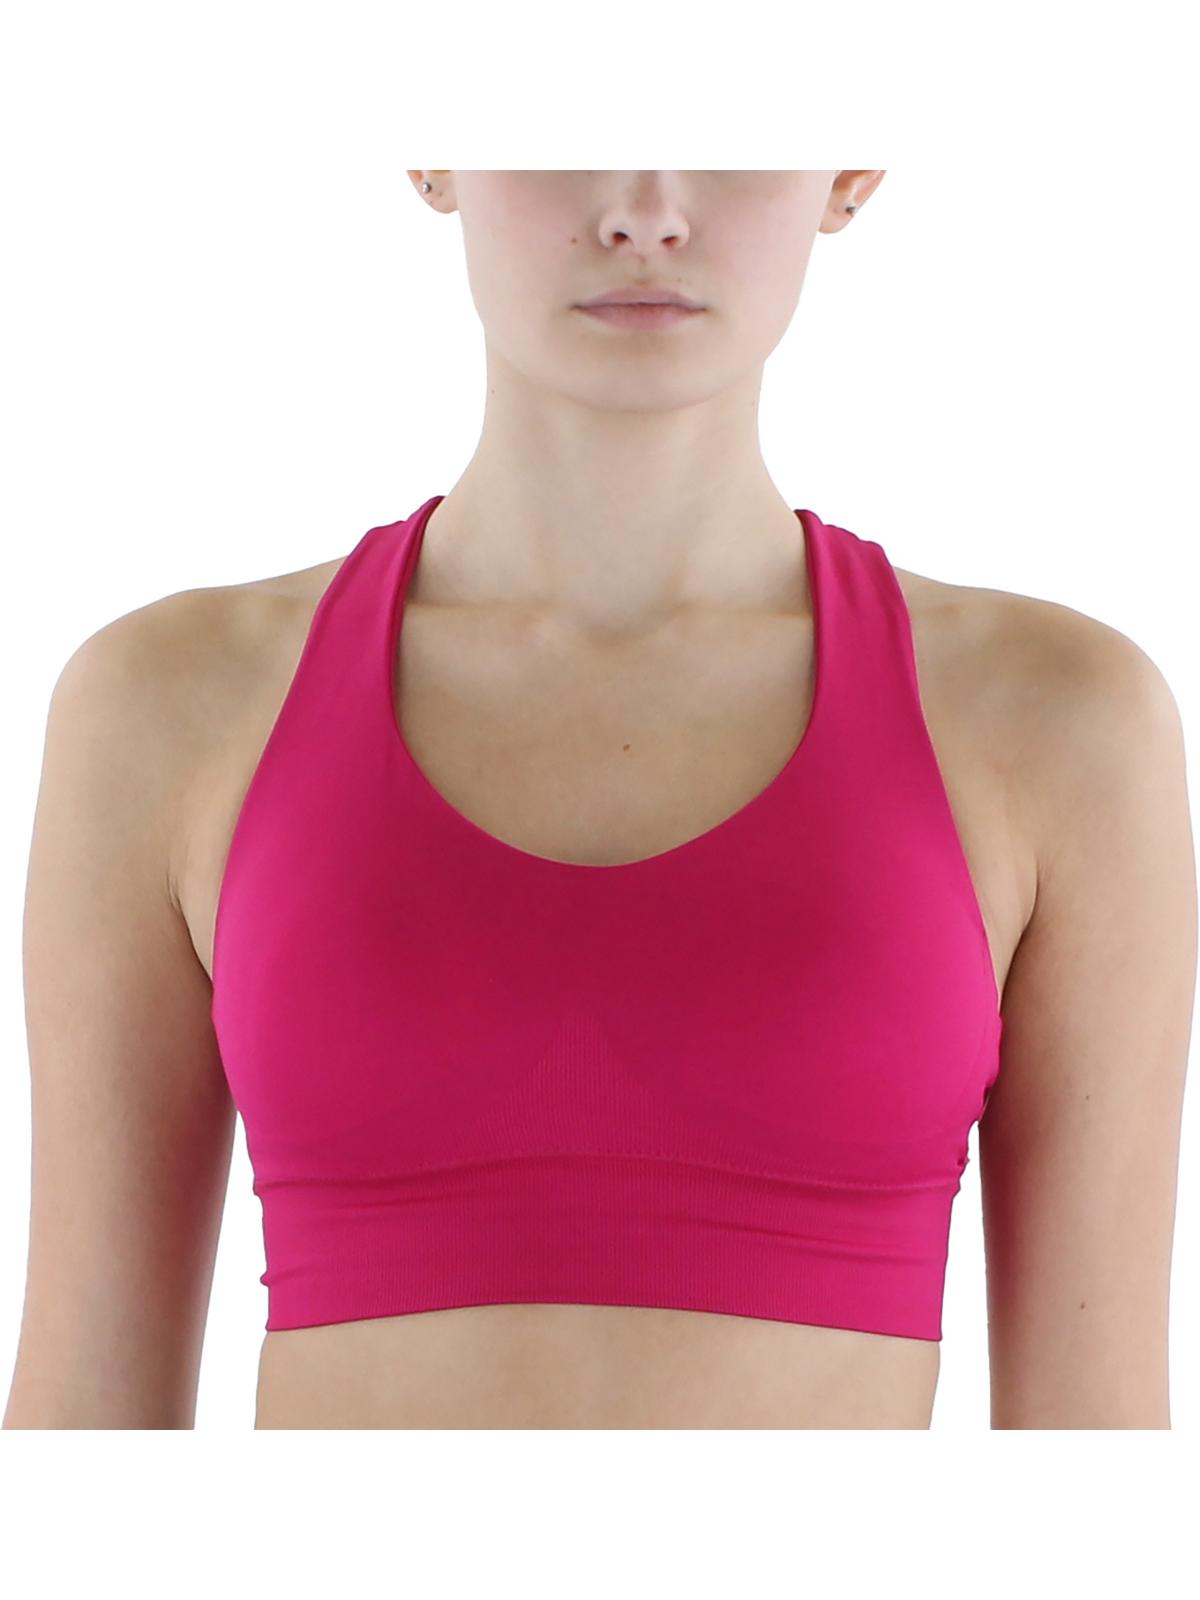 Pro-fit Womens Racerback Removable Padding Sports Bra In Pink